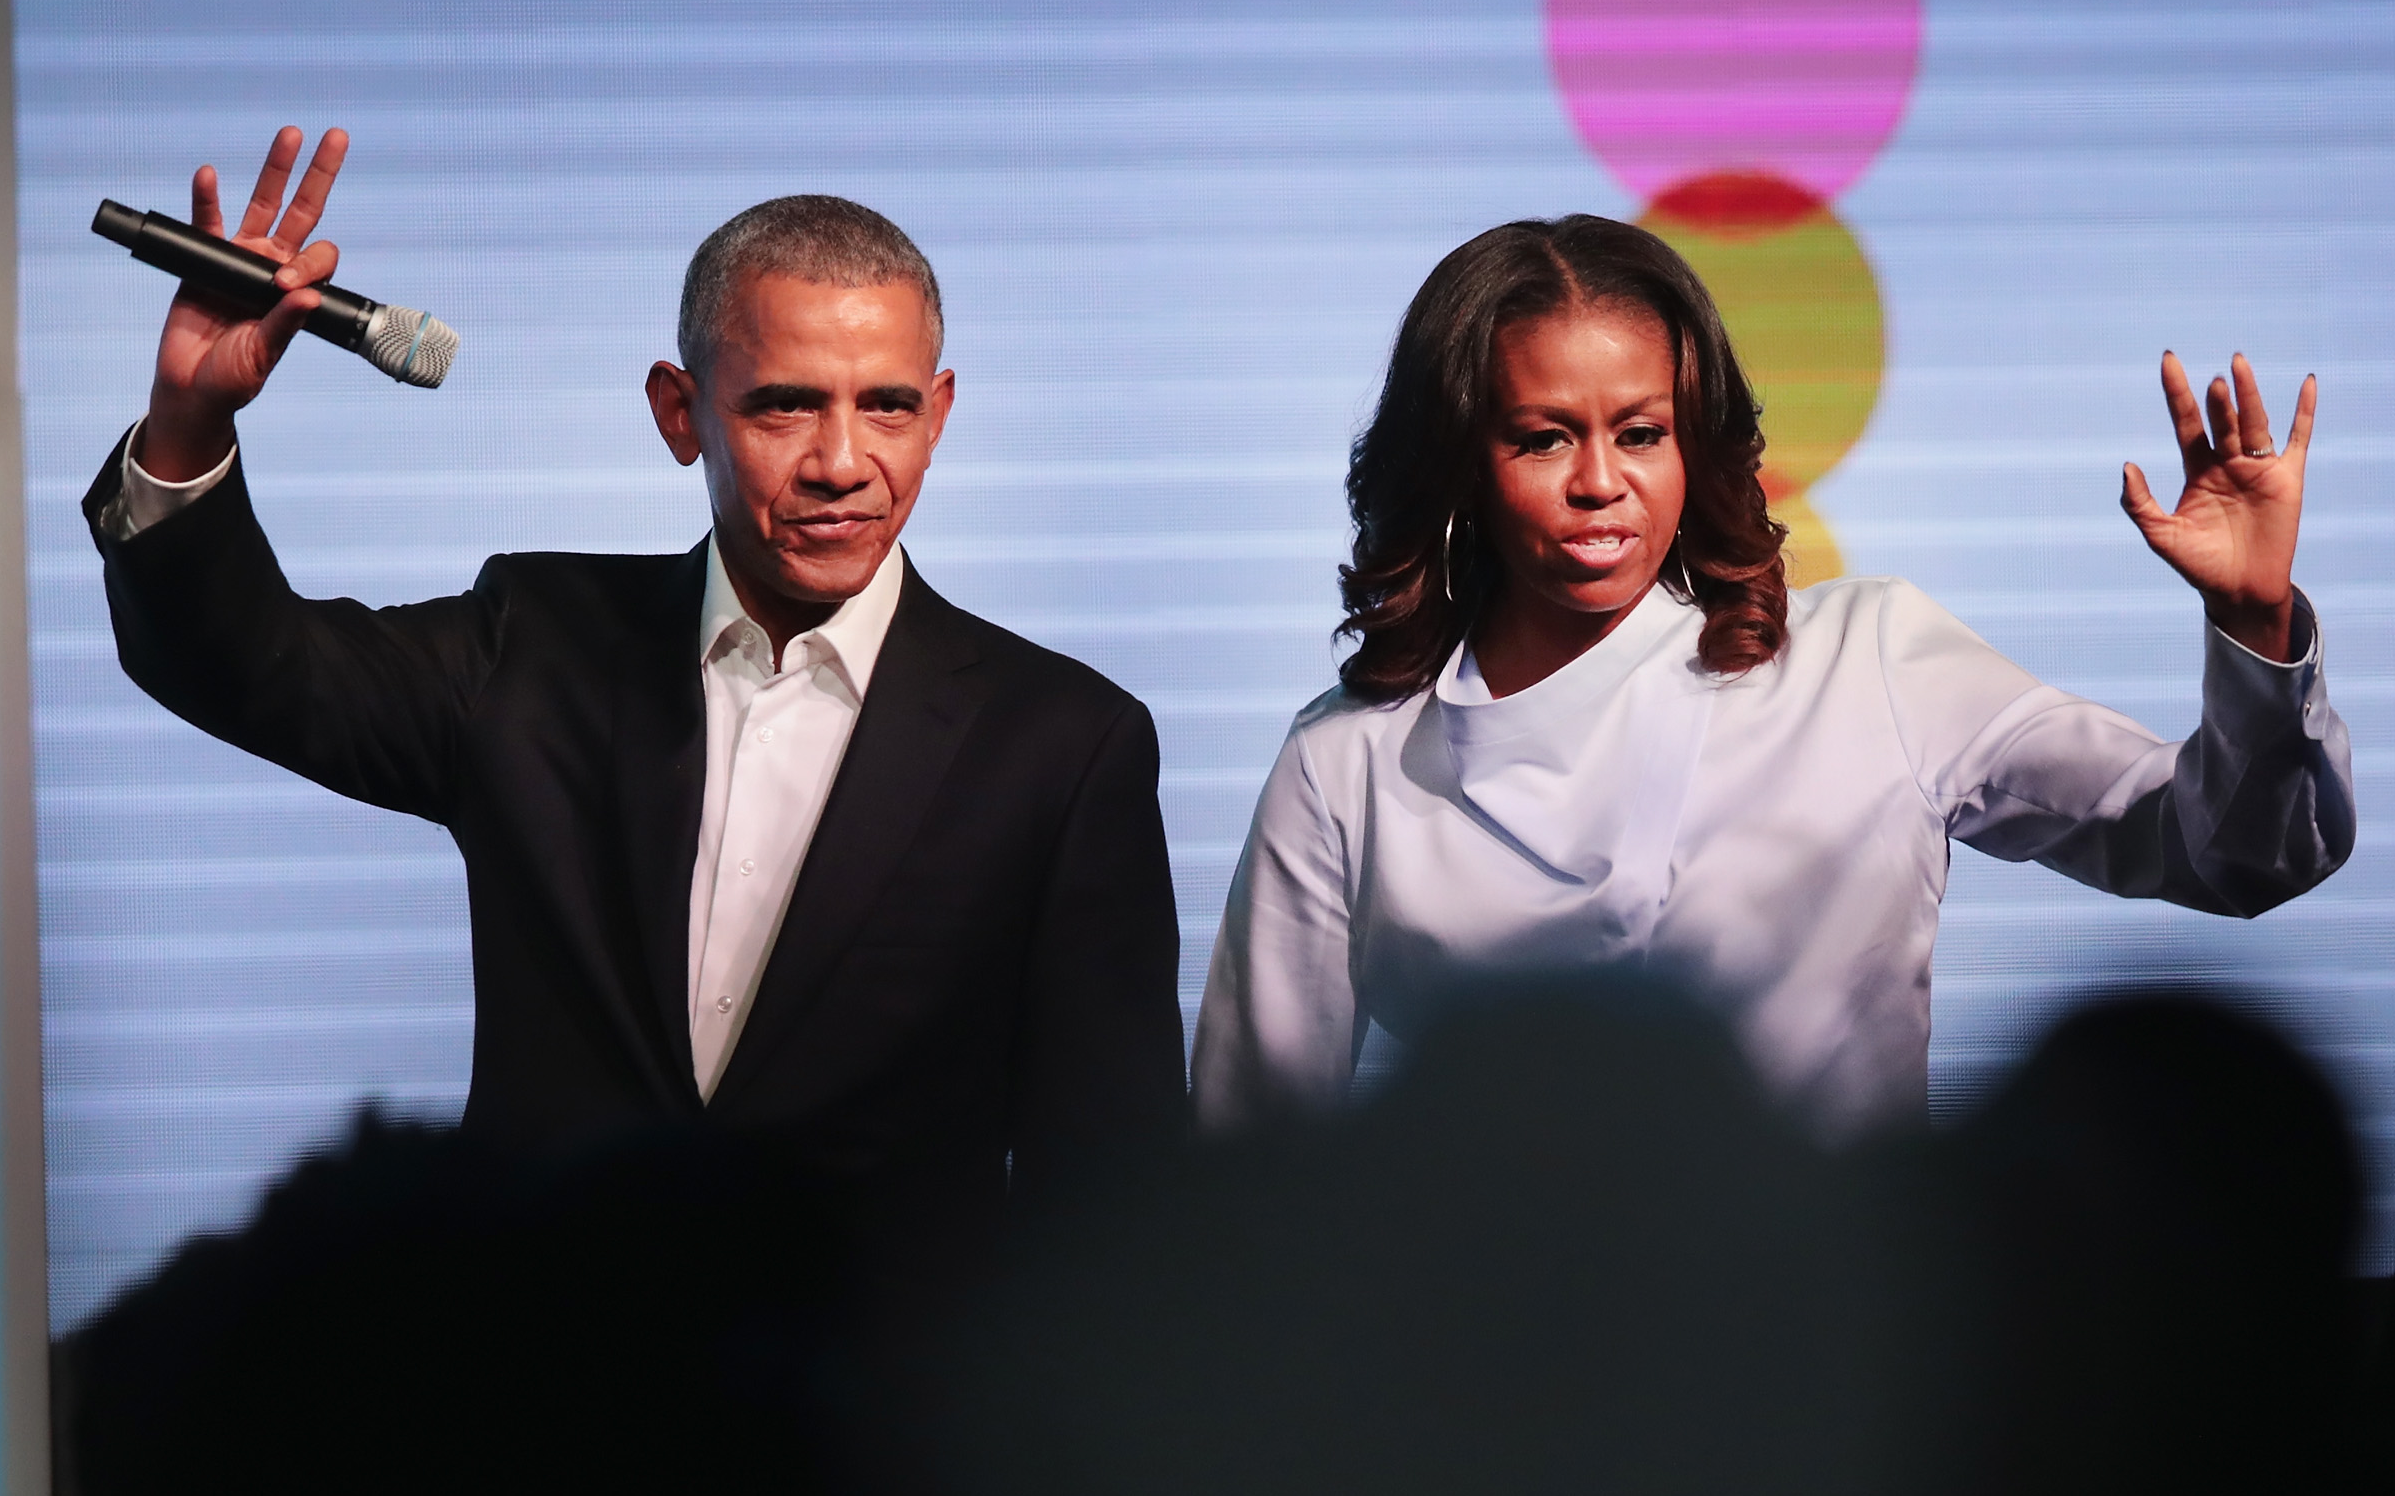 Your Mum & Dad Michelle And Barack Obama Just Signed A Podcast Deal With Spotify